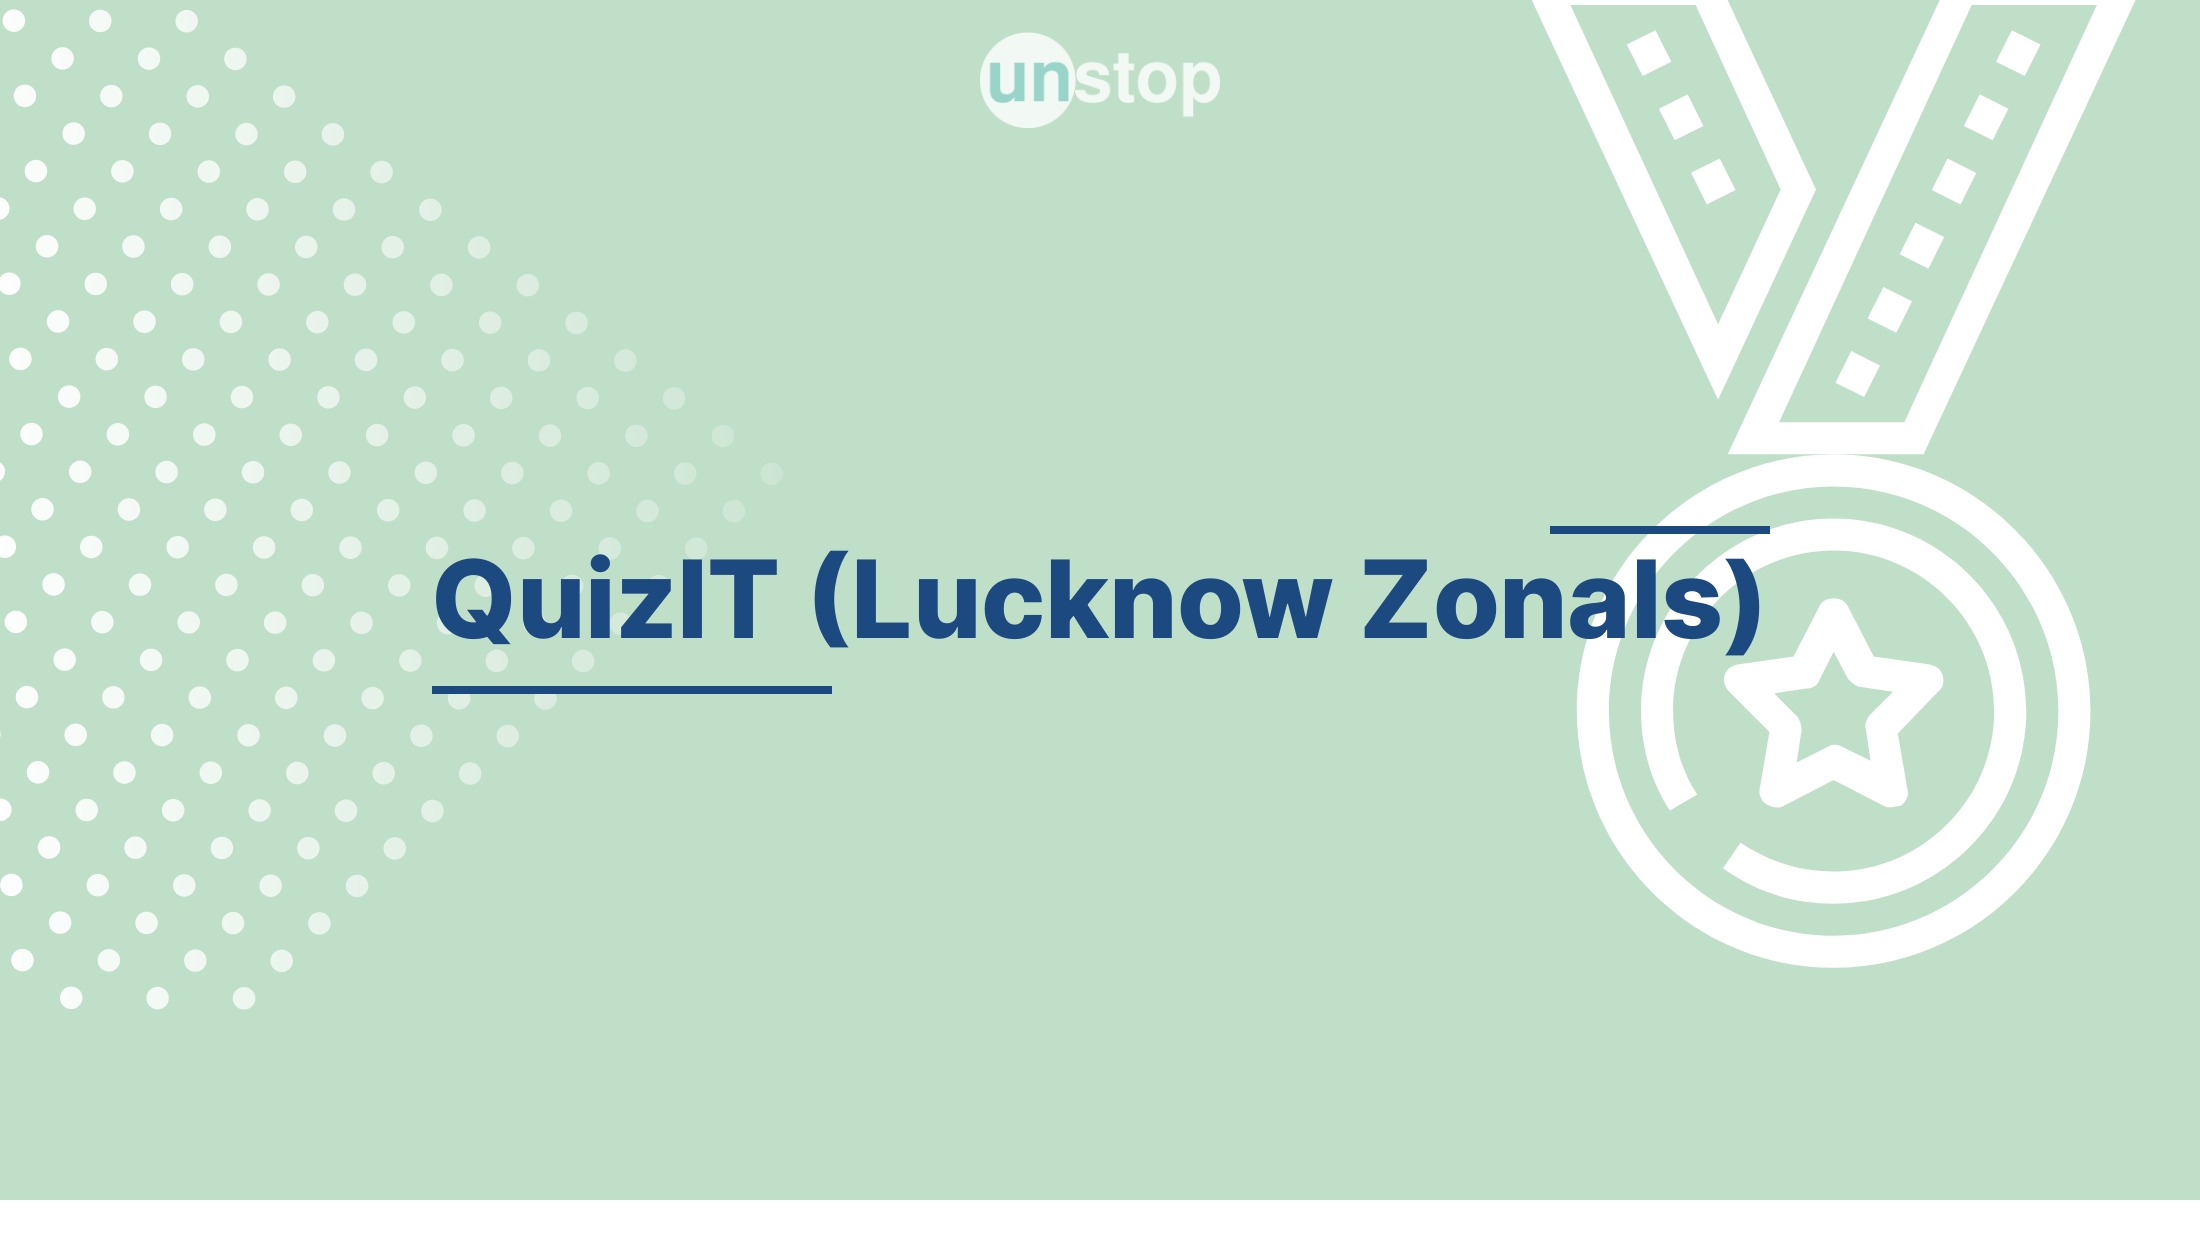 QuizIT (Lucknow Zonals) by Indian Institute of Technology (IIT), Roorkee!  // Unstop